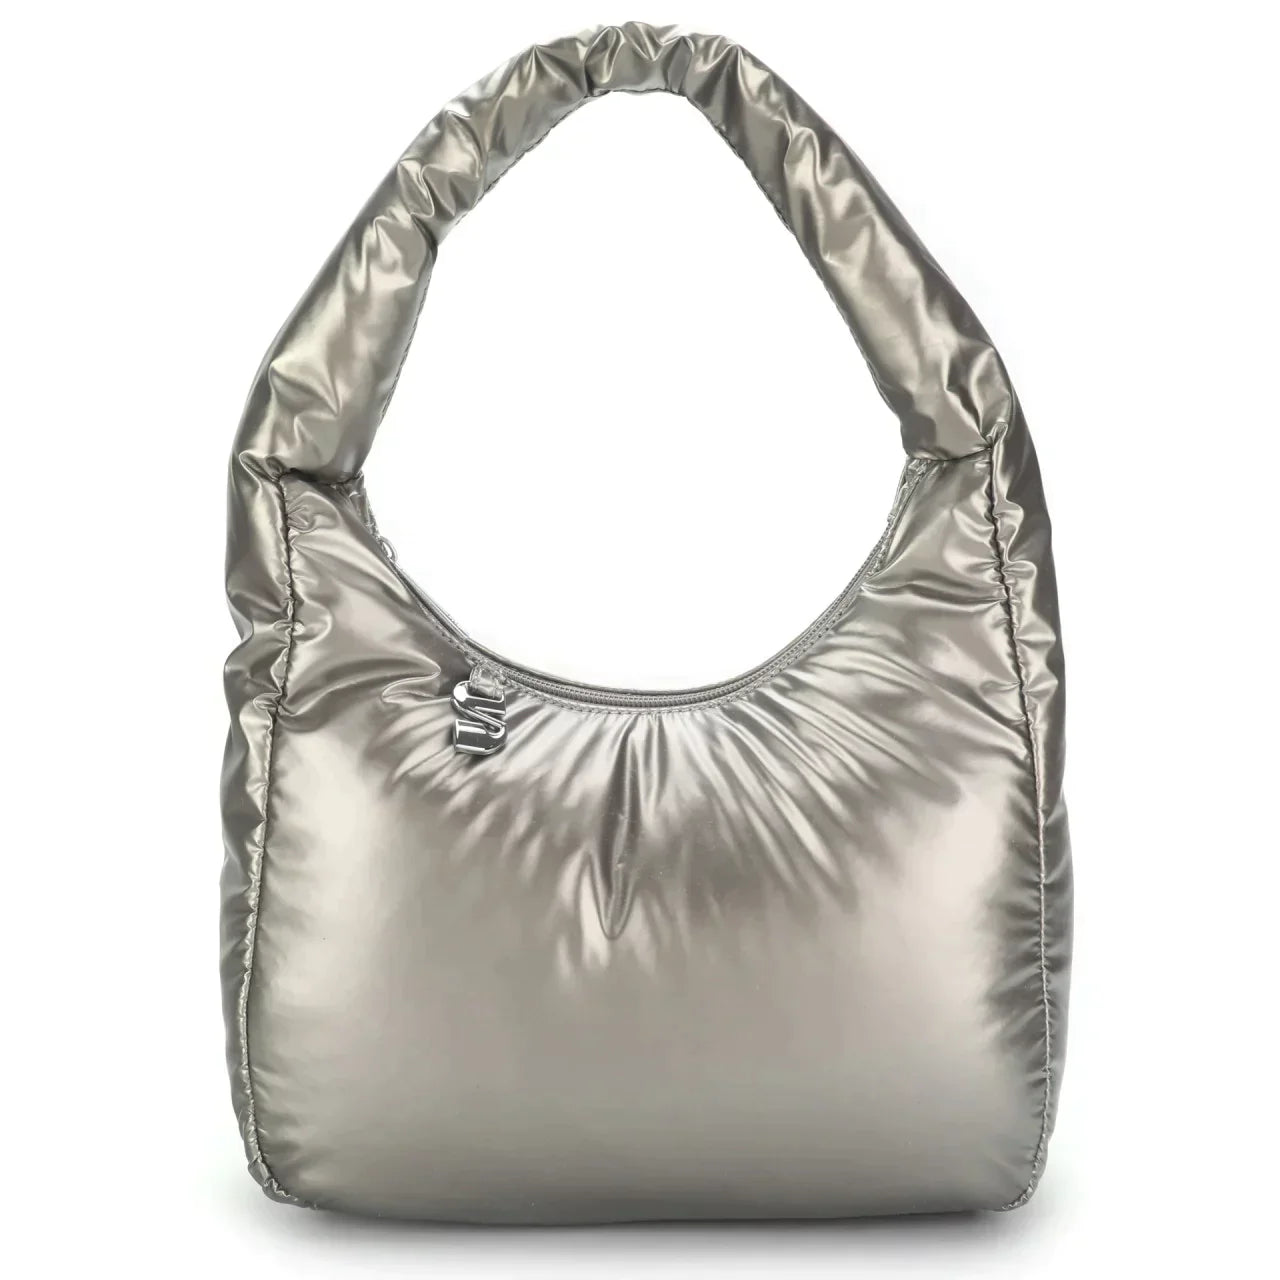 THE SOFIA PADDED MINI SHOULDER BAG - SILVER CHROME - EXCLUSIVE Bags from SILFEN - Just $62.00! SHOP NOW AT IAMINHATELOVE BOTH IN STORE FOR CYPRUS AND ONLINE WORLDWIDE